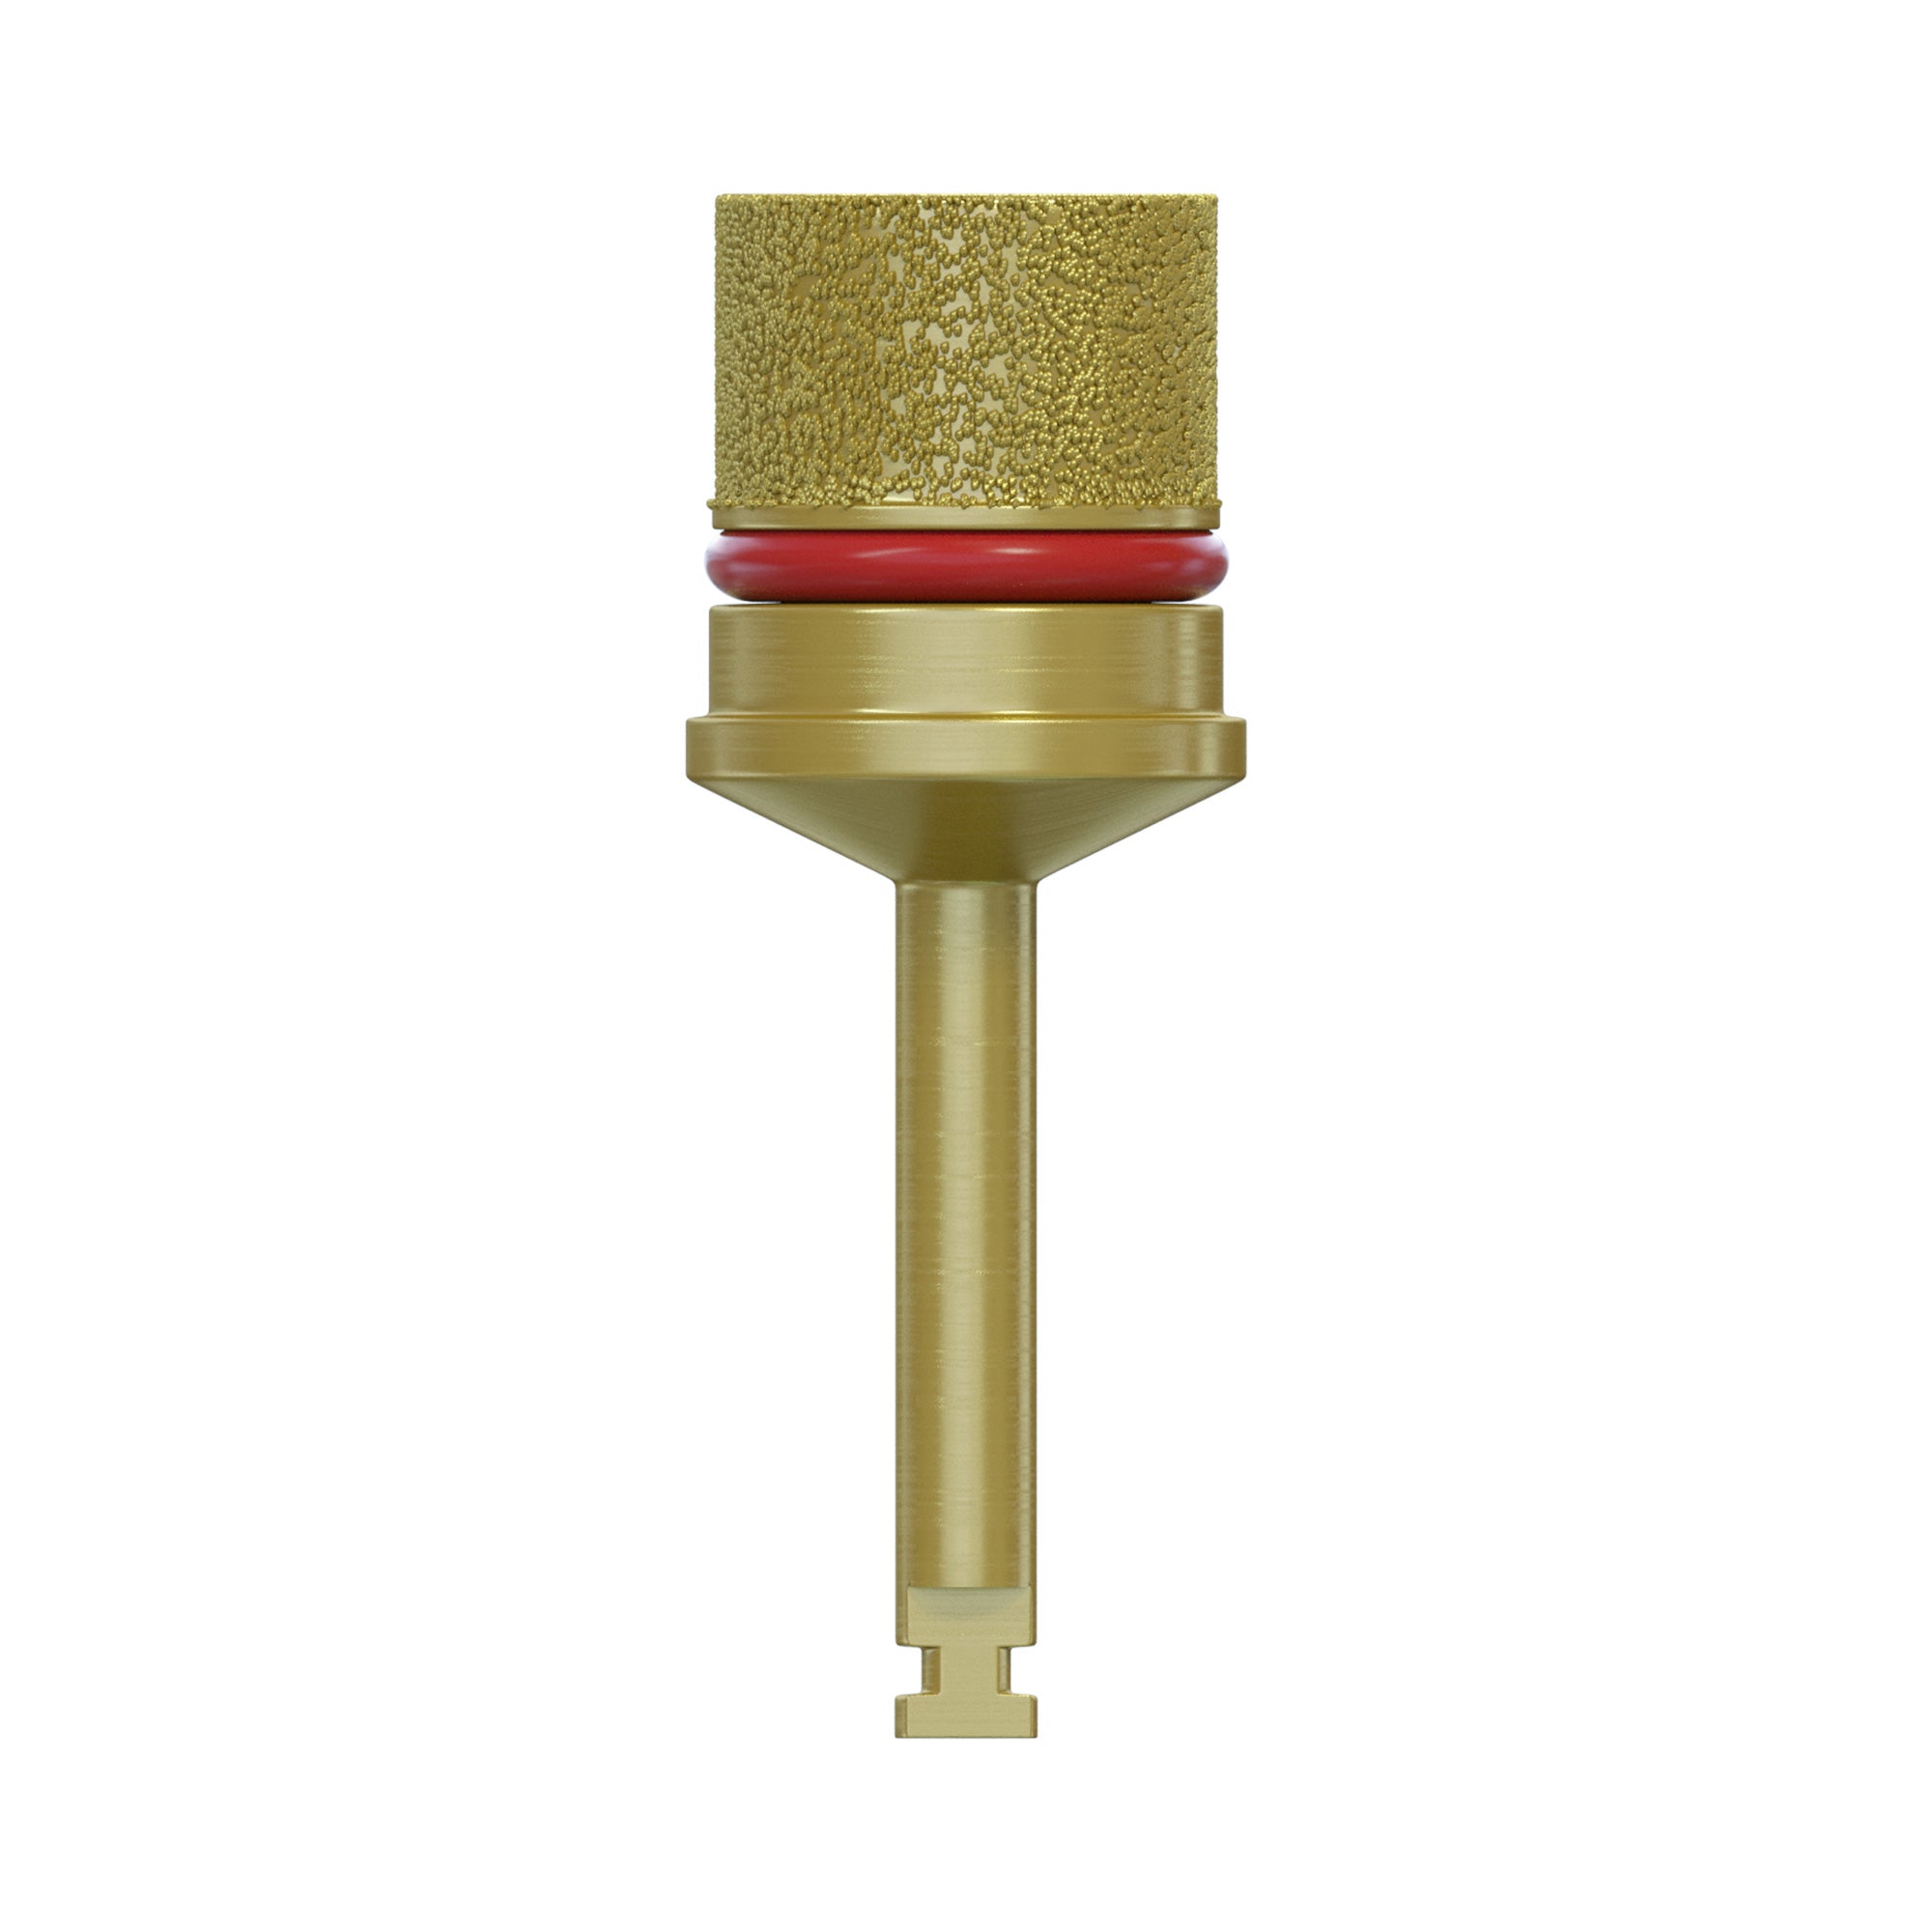 DSI Lateral Approach Core Drill For Sinus Lifting "LACD Drill"